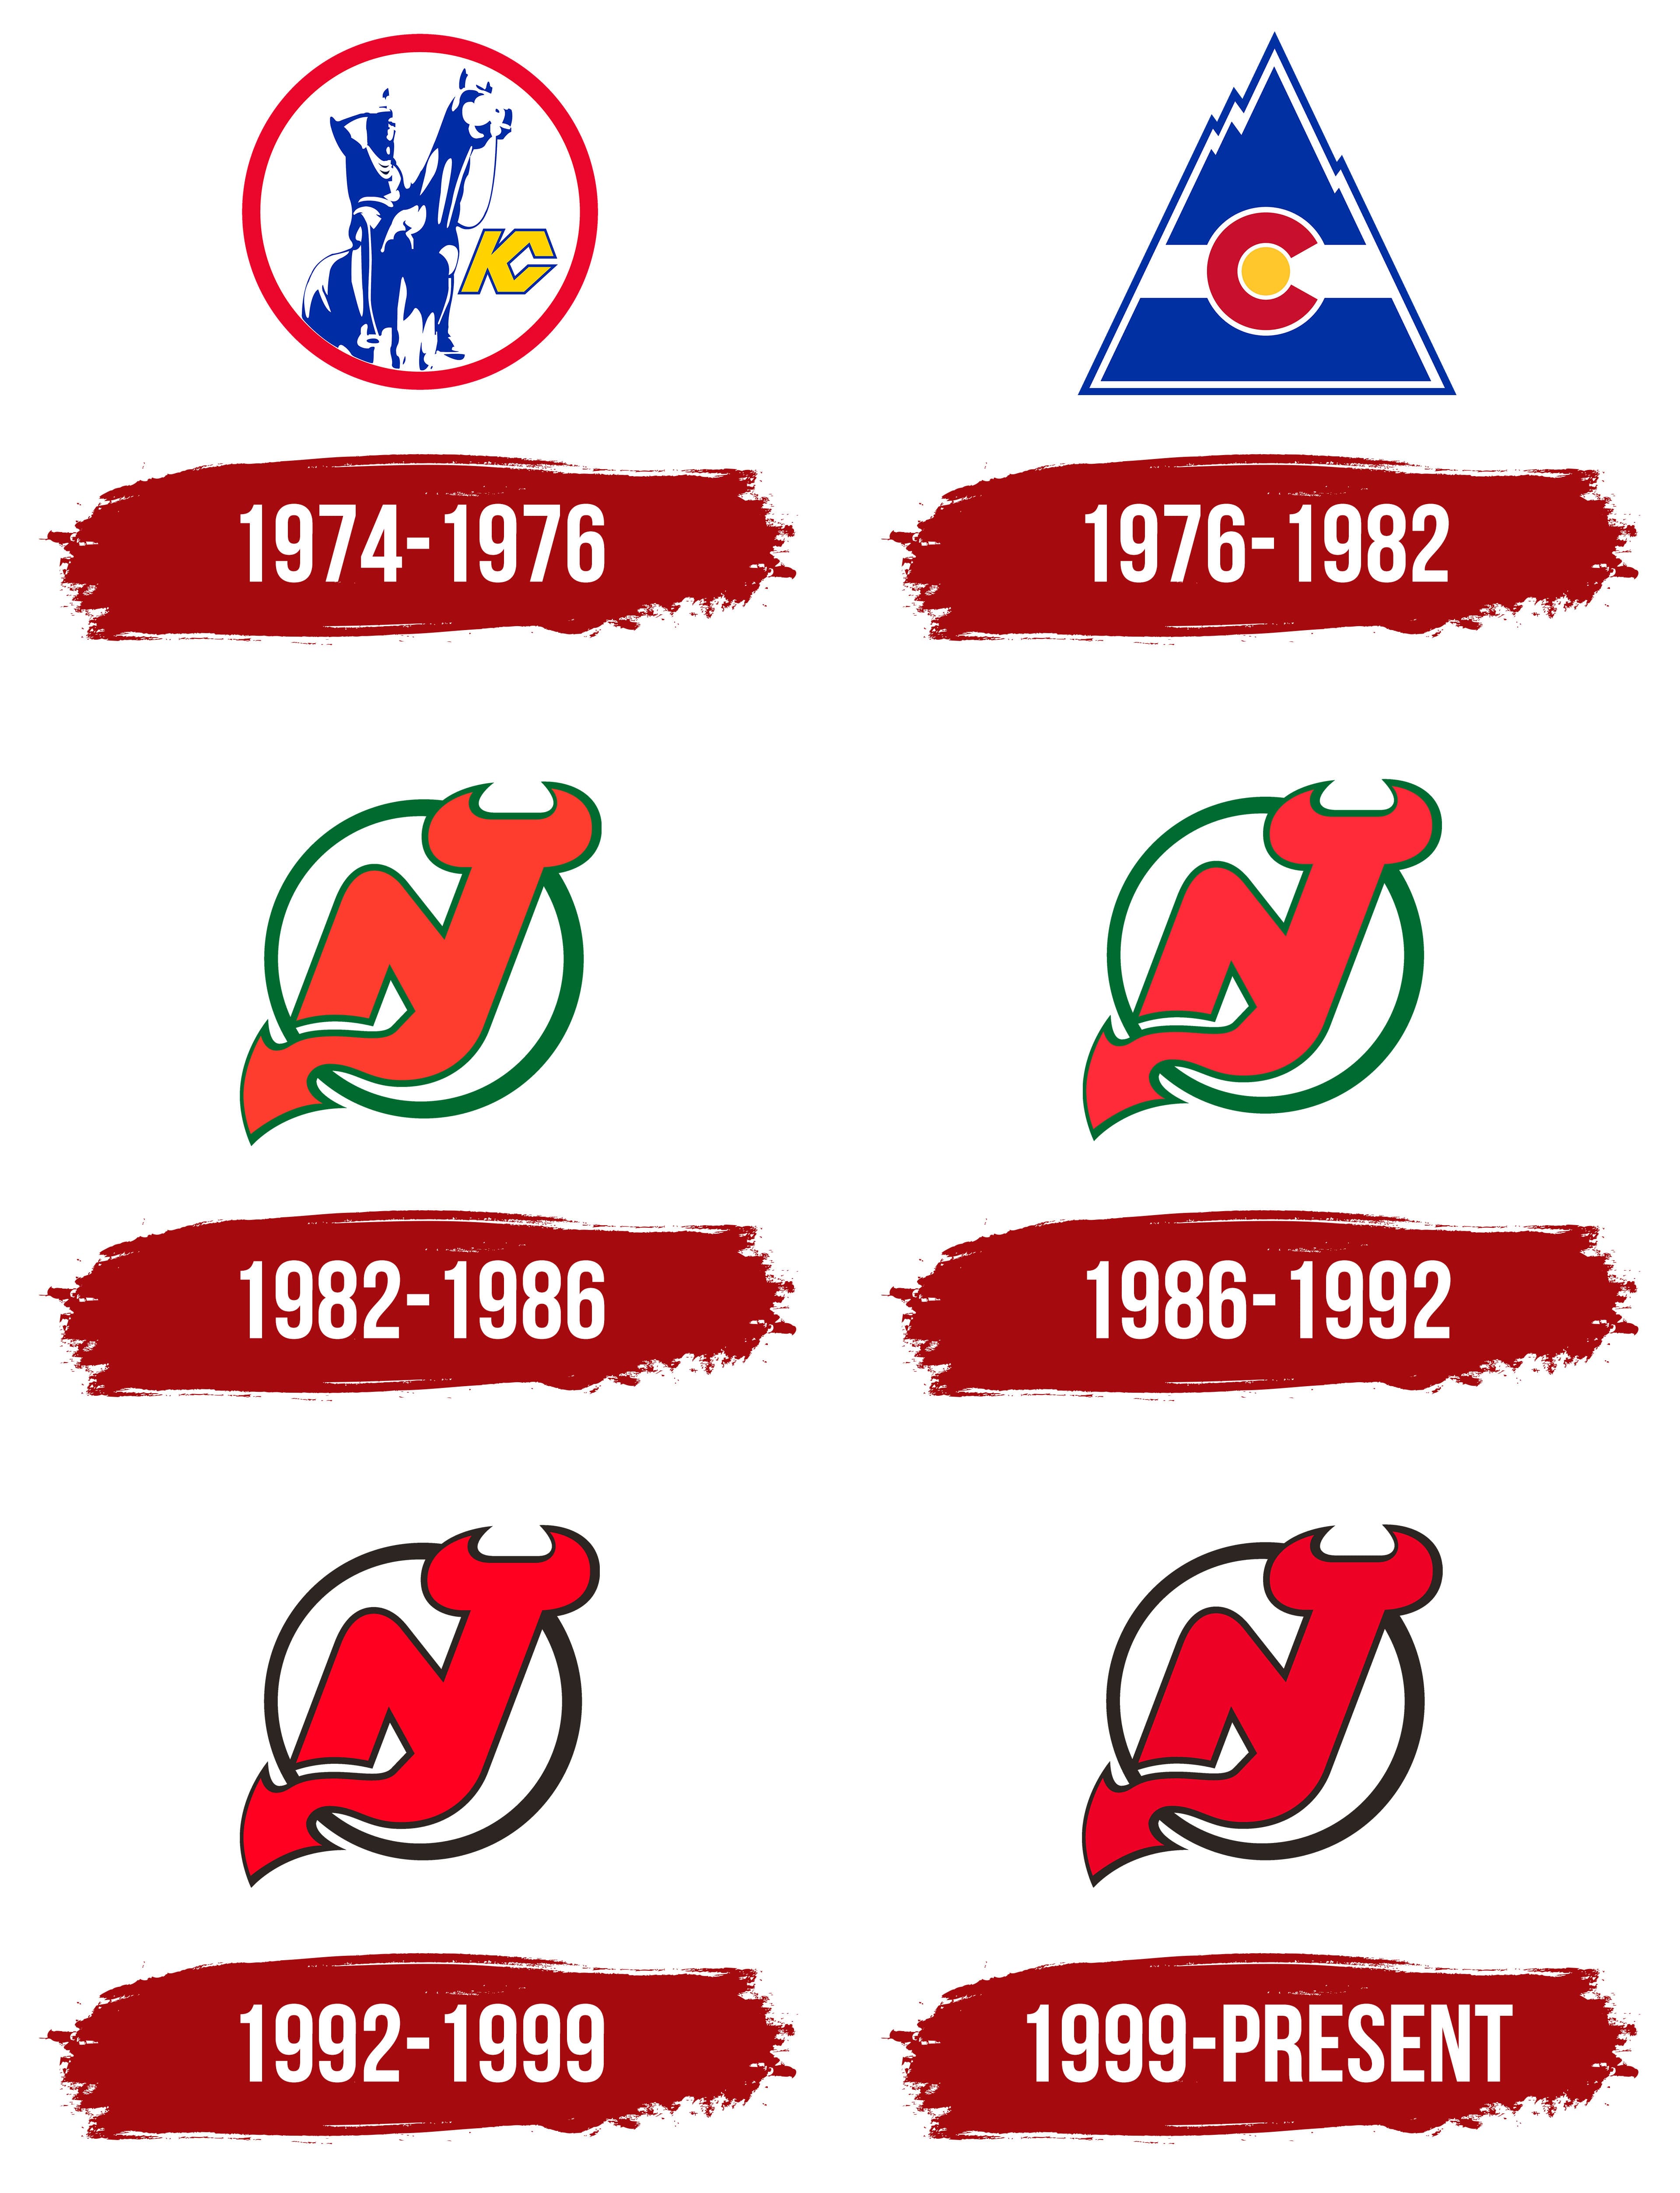 NHL's New Jersey Devils All-Time Logos, Uniforms and Arenas (1974